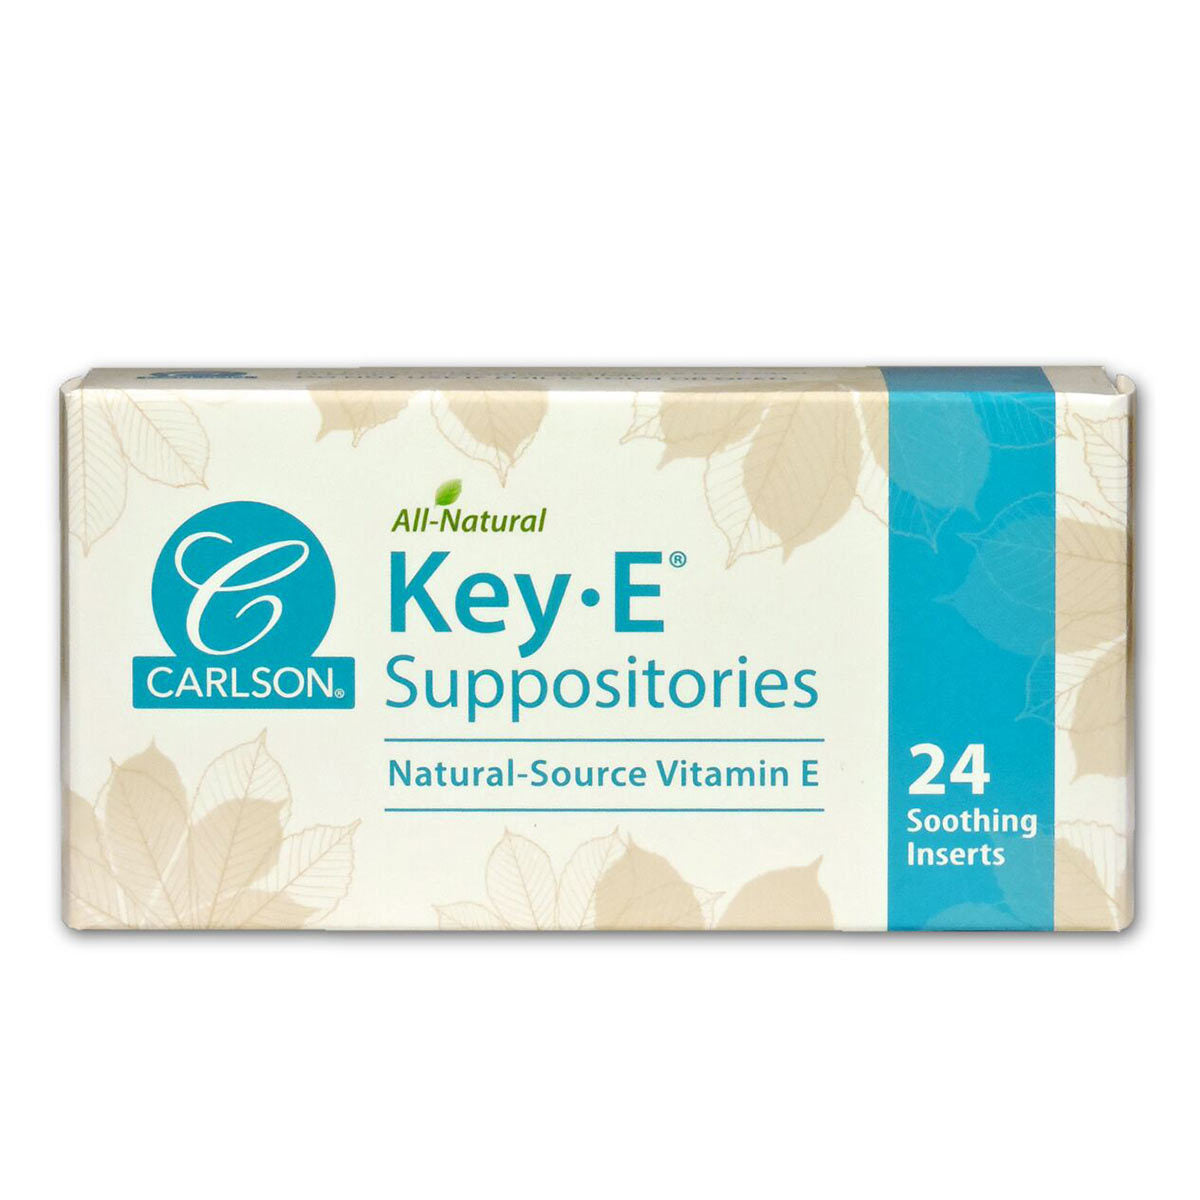 Primary image of Key-E Suppositories